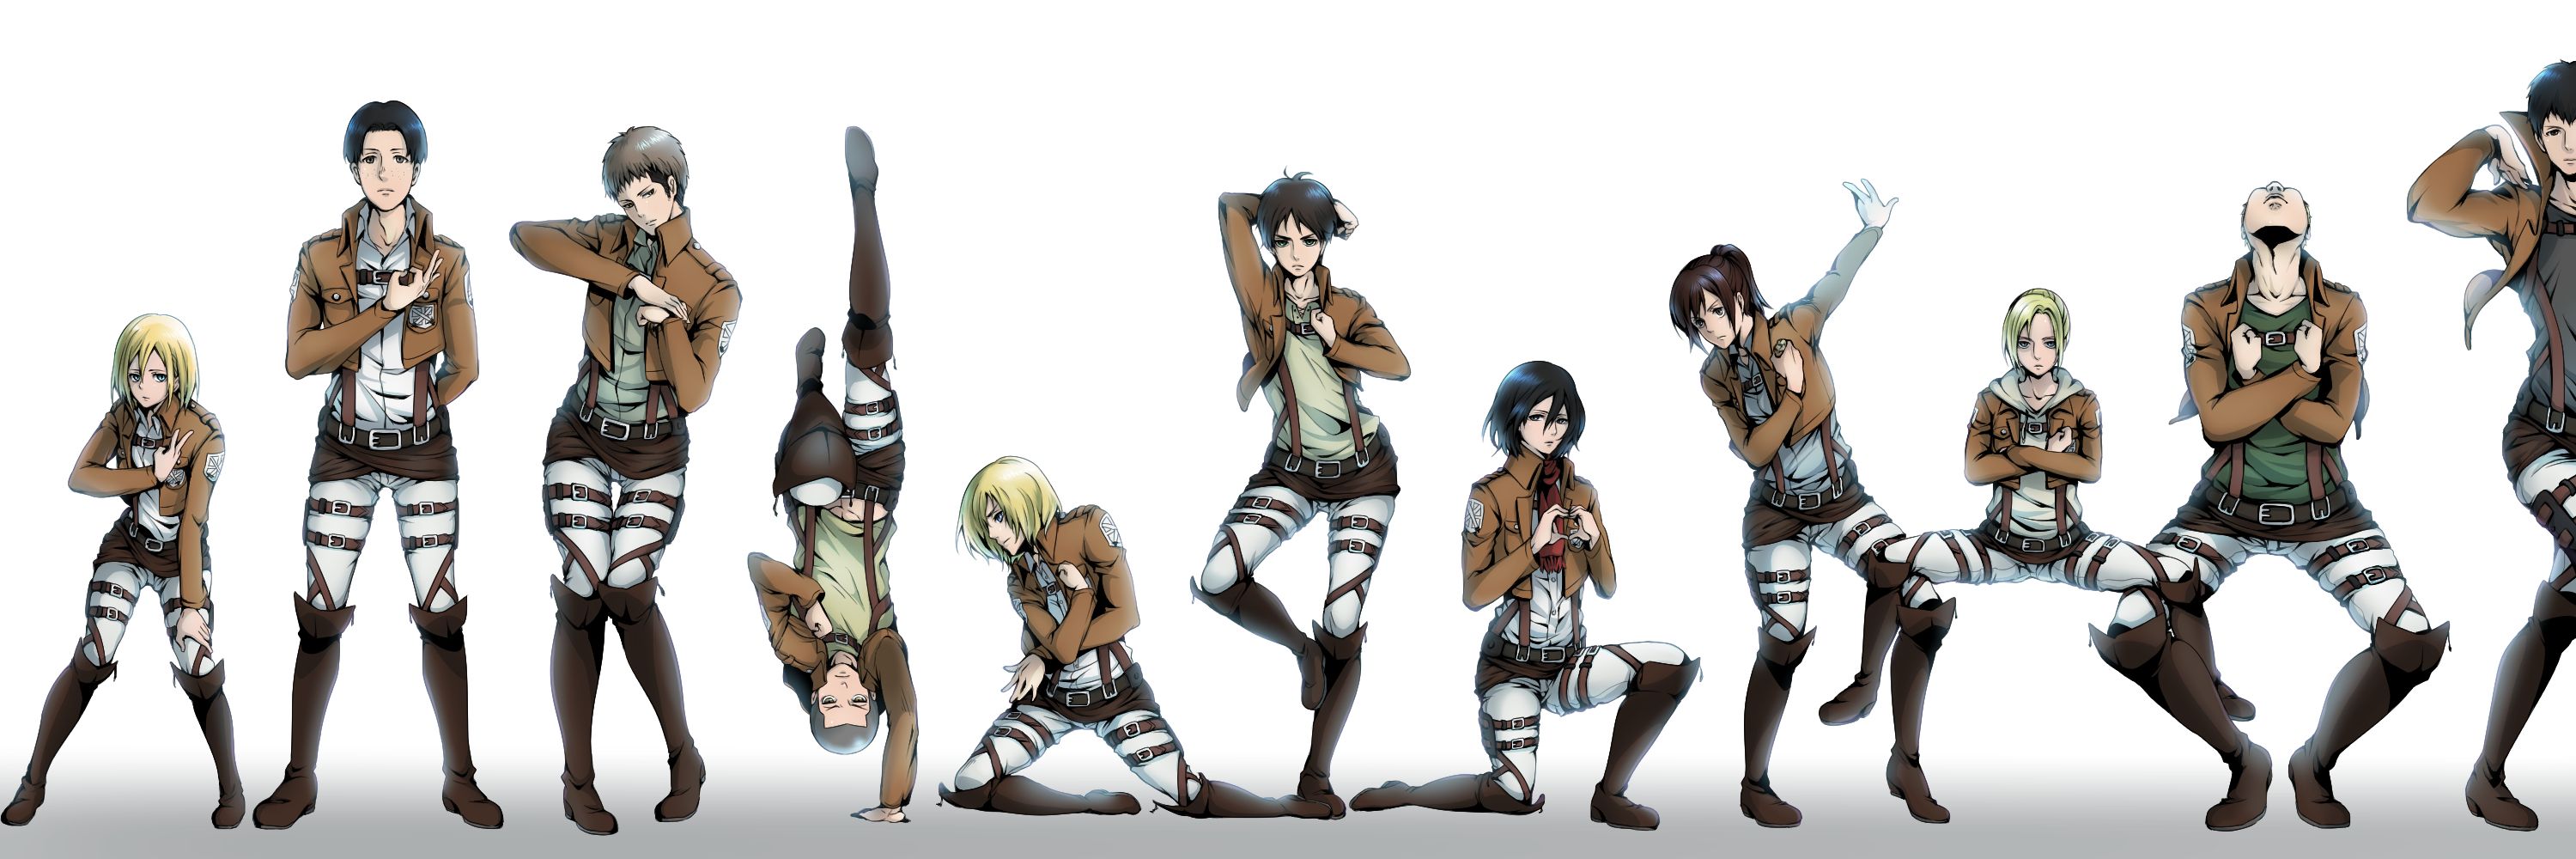 Download wallpaper from anime Attack On Titan with tags: Good quality